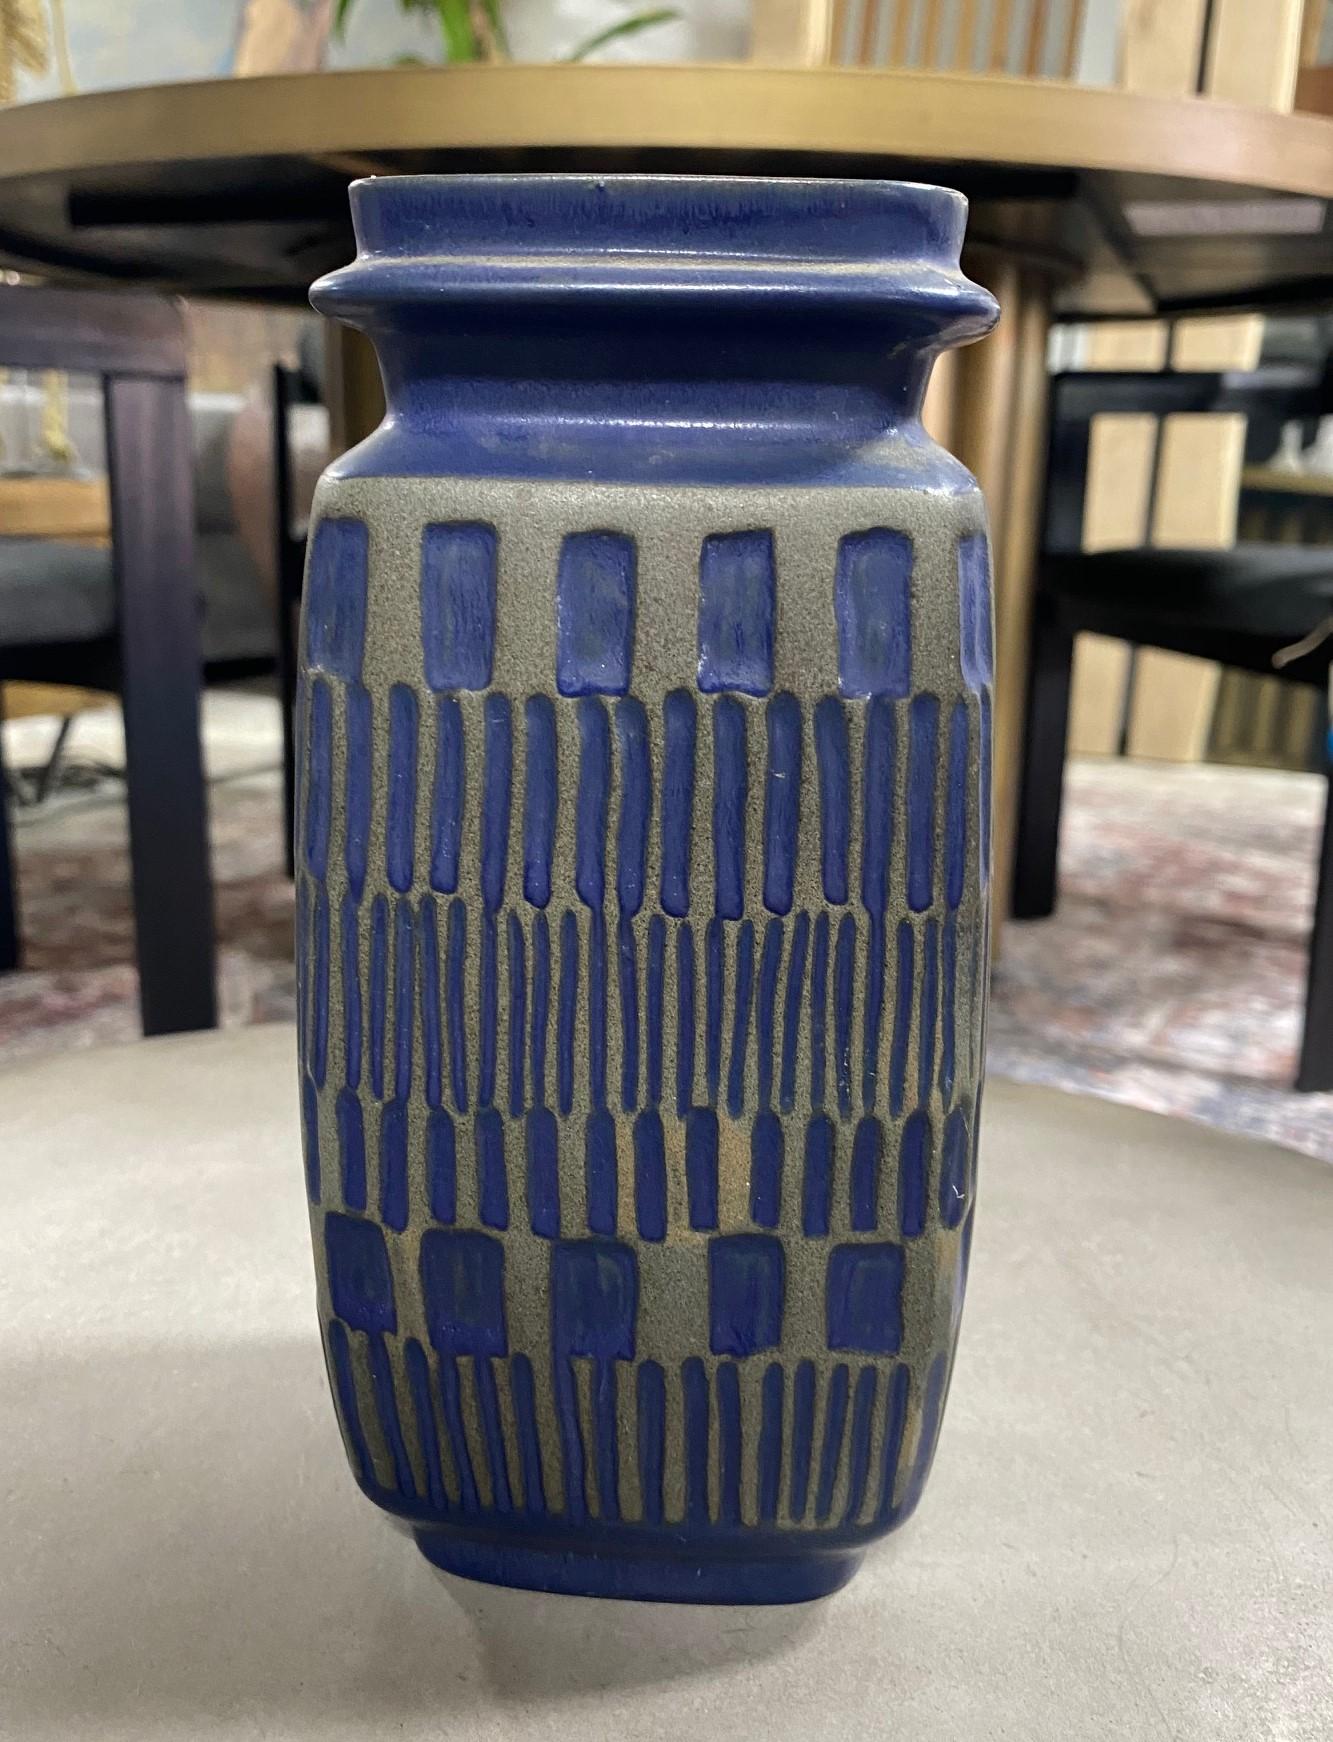 A beautiful Mid-Century Modern vase by Upsala Ekeby Gefle, Sweden featuring a wonderful geometric pattern and penetrating deep blue color (perhaps designed by Hjördis Oldfors who was known for her graphic patterns and striking decor). 

Signed/